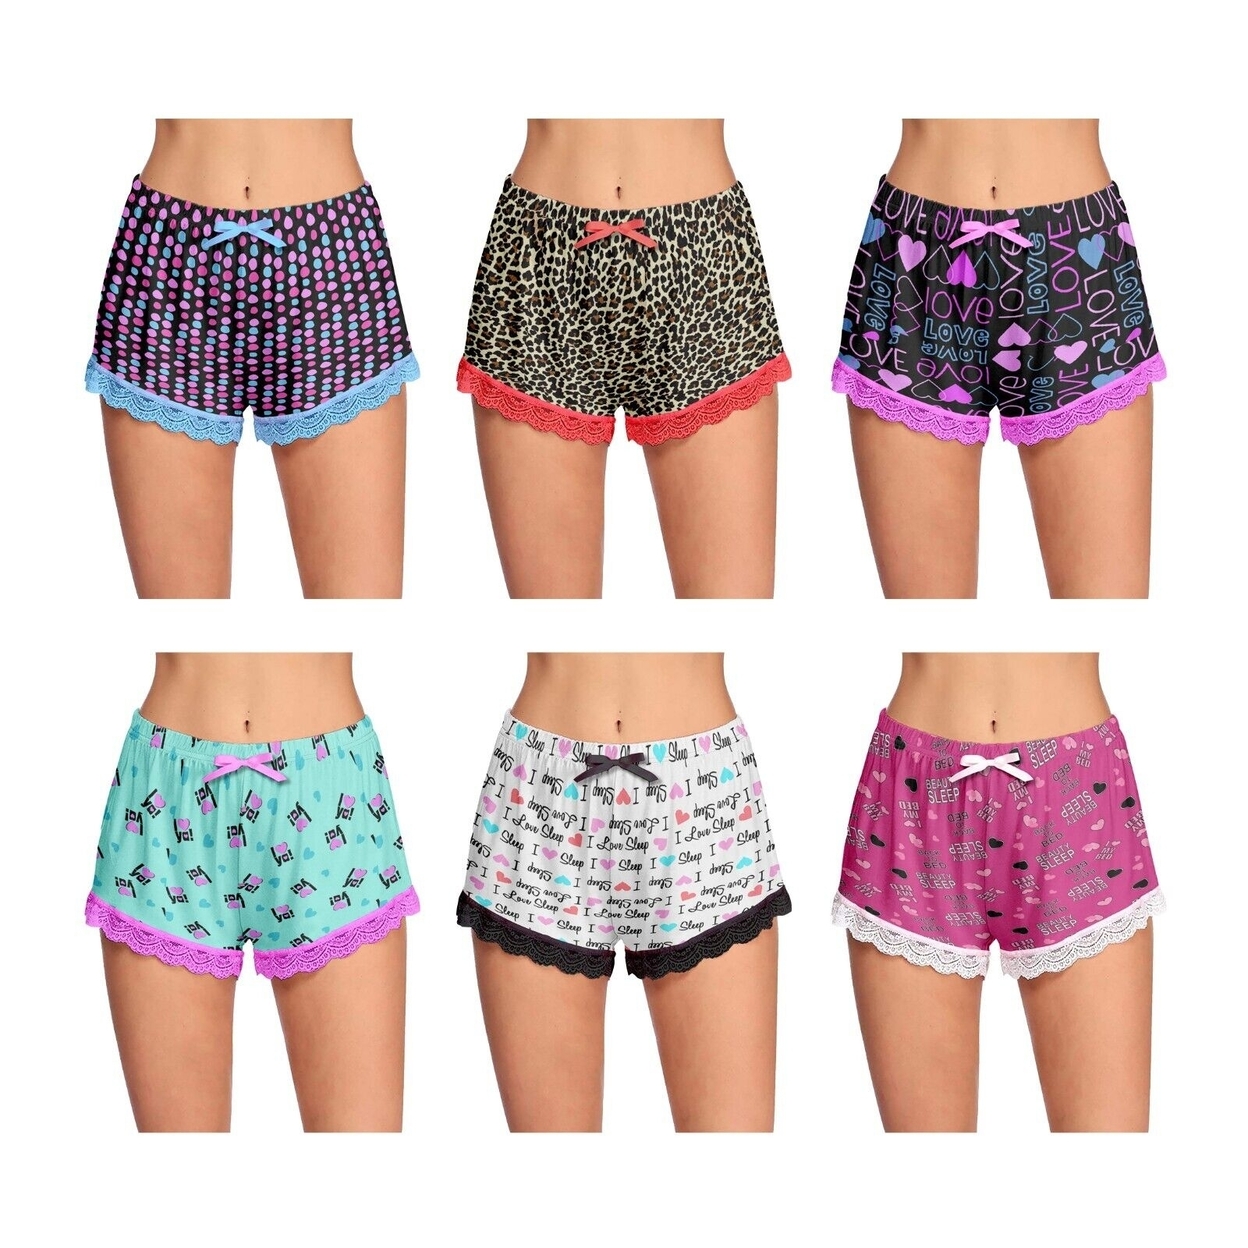 4-Pack: Women's Ultra-Soft Cozy Fun Printed Lace Trim Pajama Lounge Shorts - Small, Love